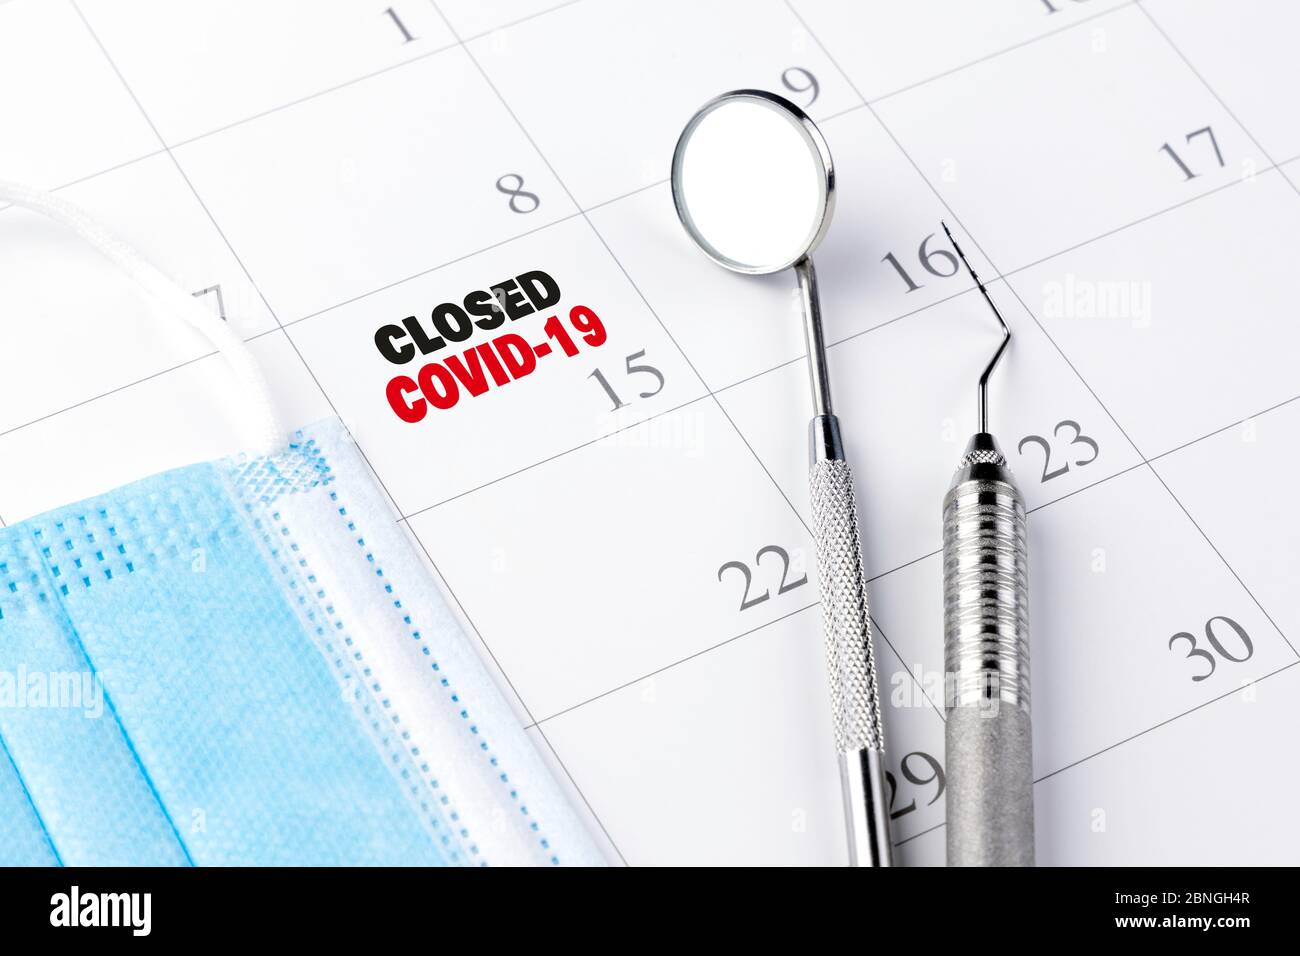 Dentist Closed due to COVID-19 Coronavirus Outbreak Lockdown Appointment in Calendar with Dental Tools. Stock Photo